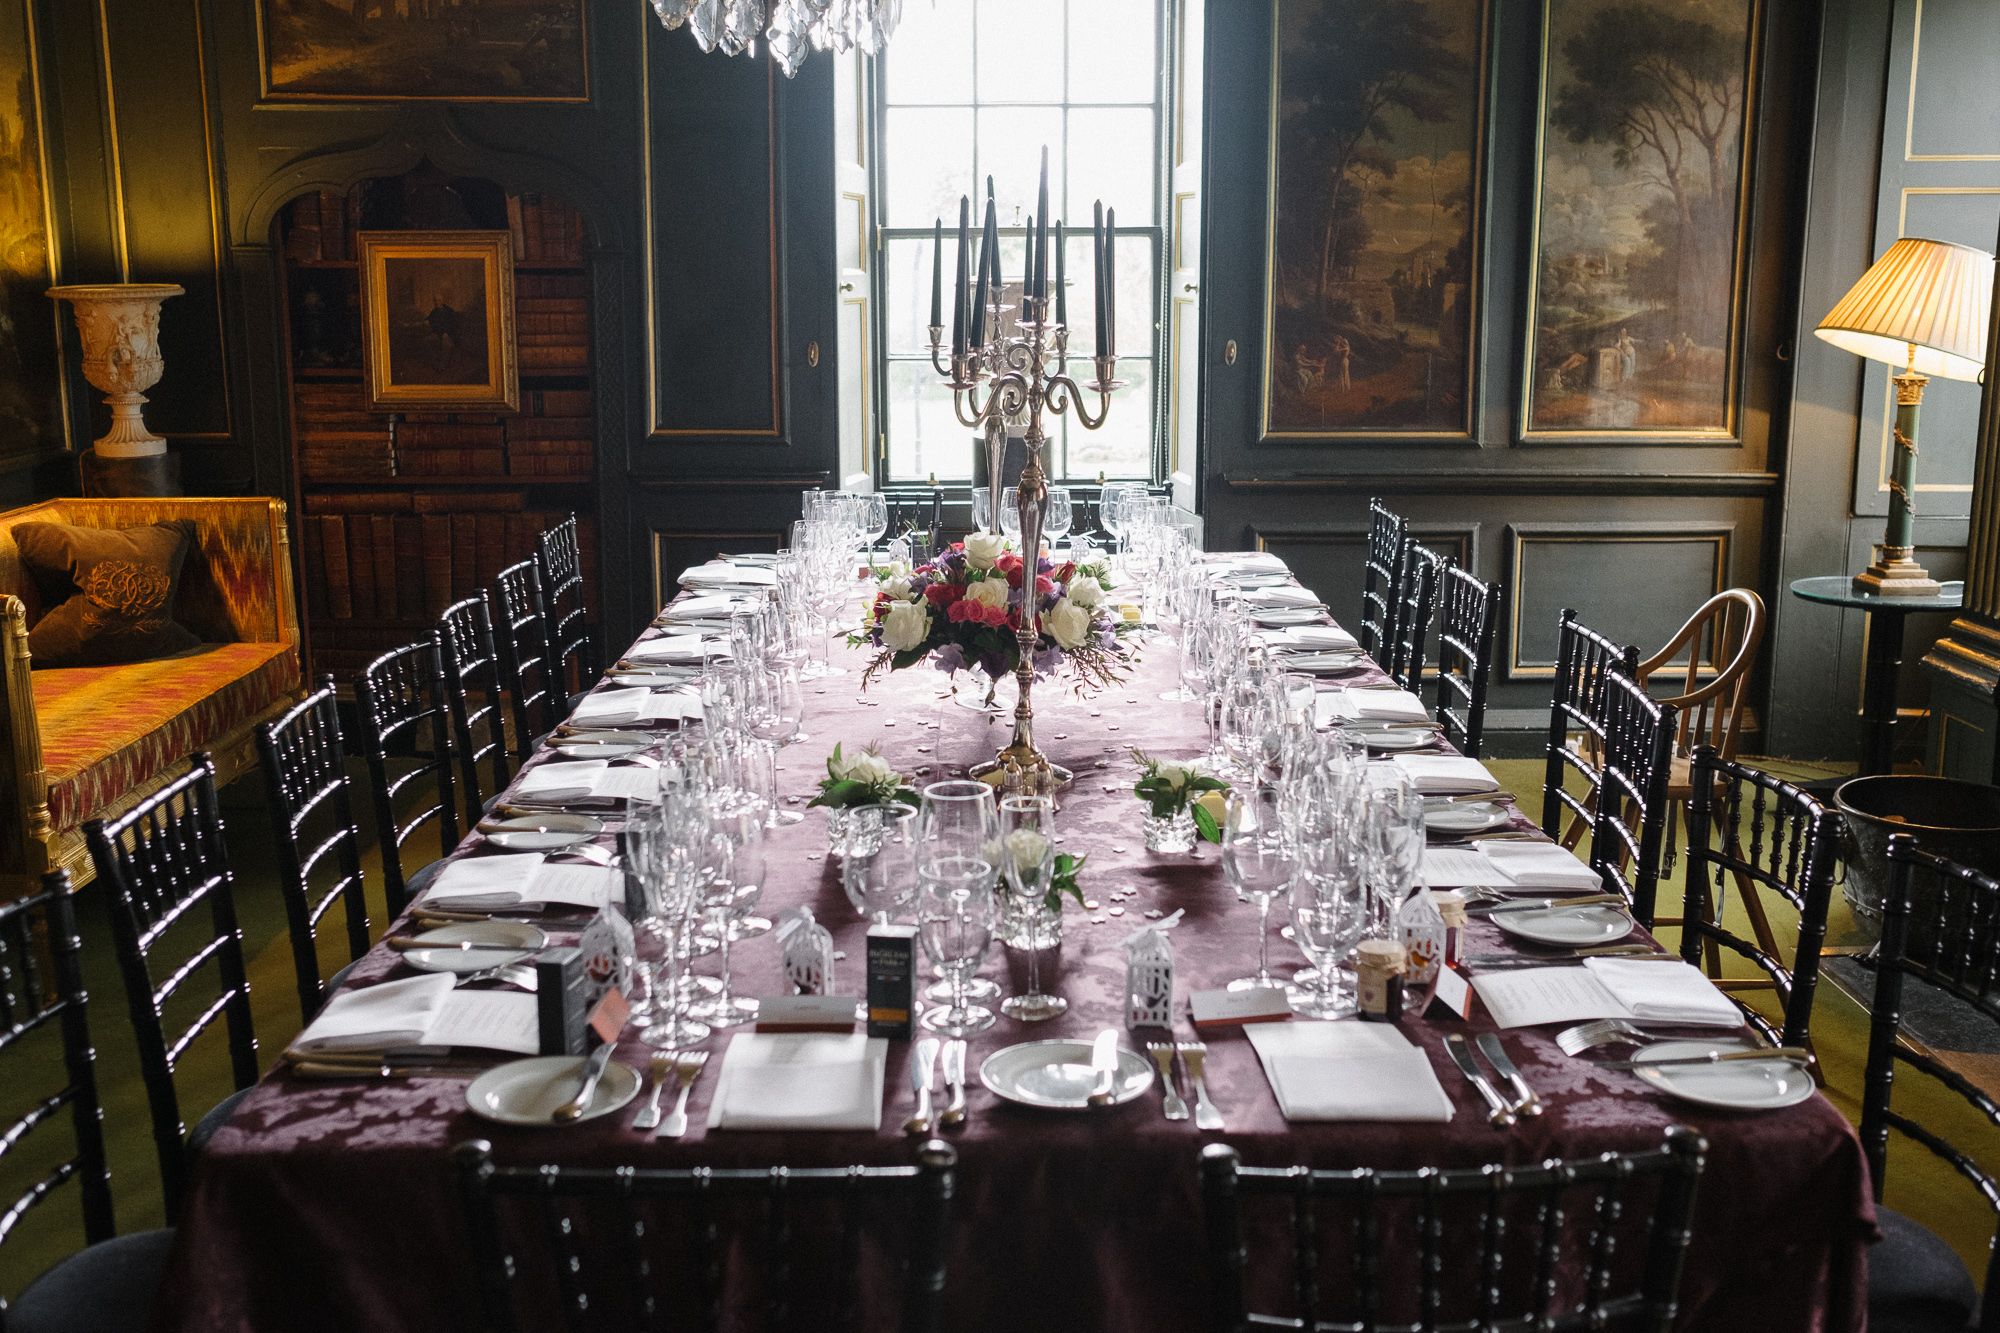 Luxuriously decorated table ready for wedding dinner at Prestonfield House Edinburgh